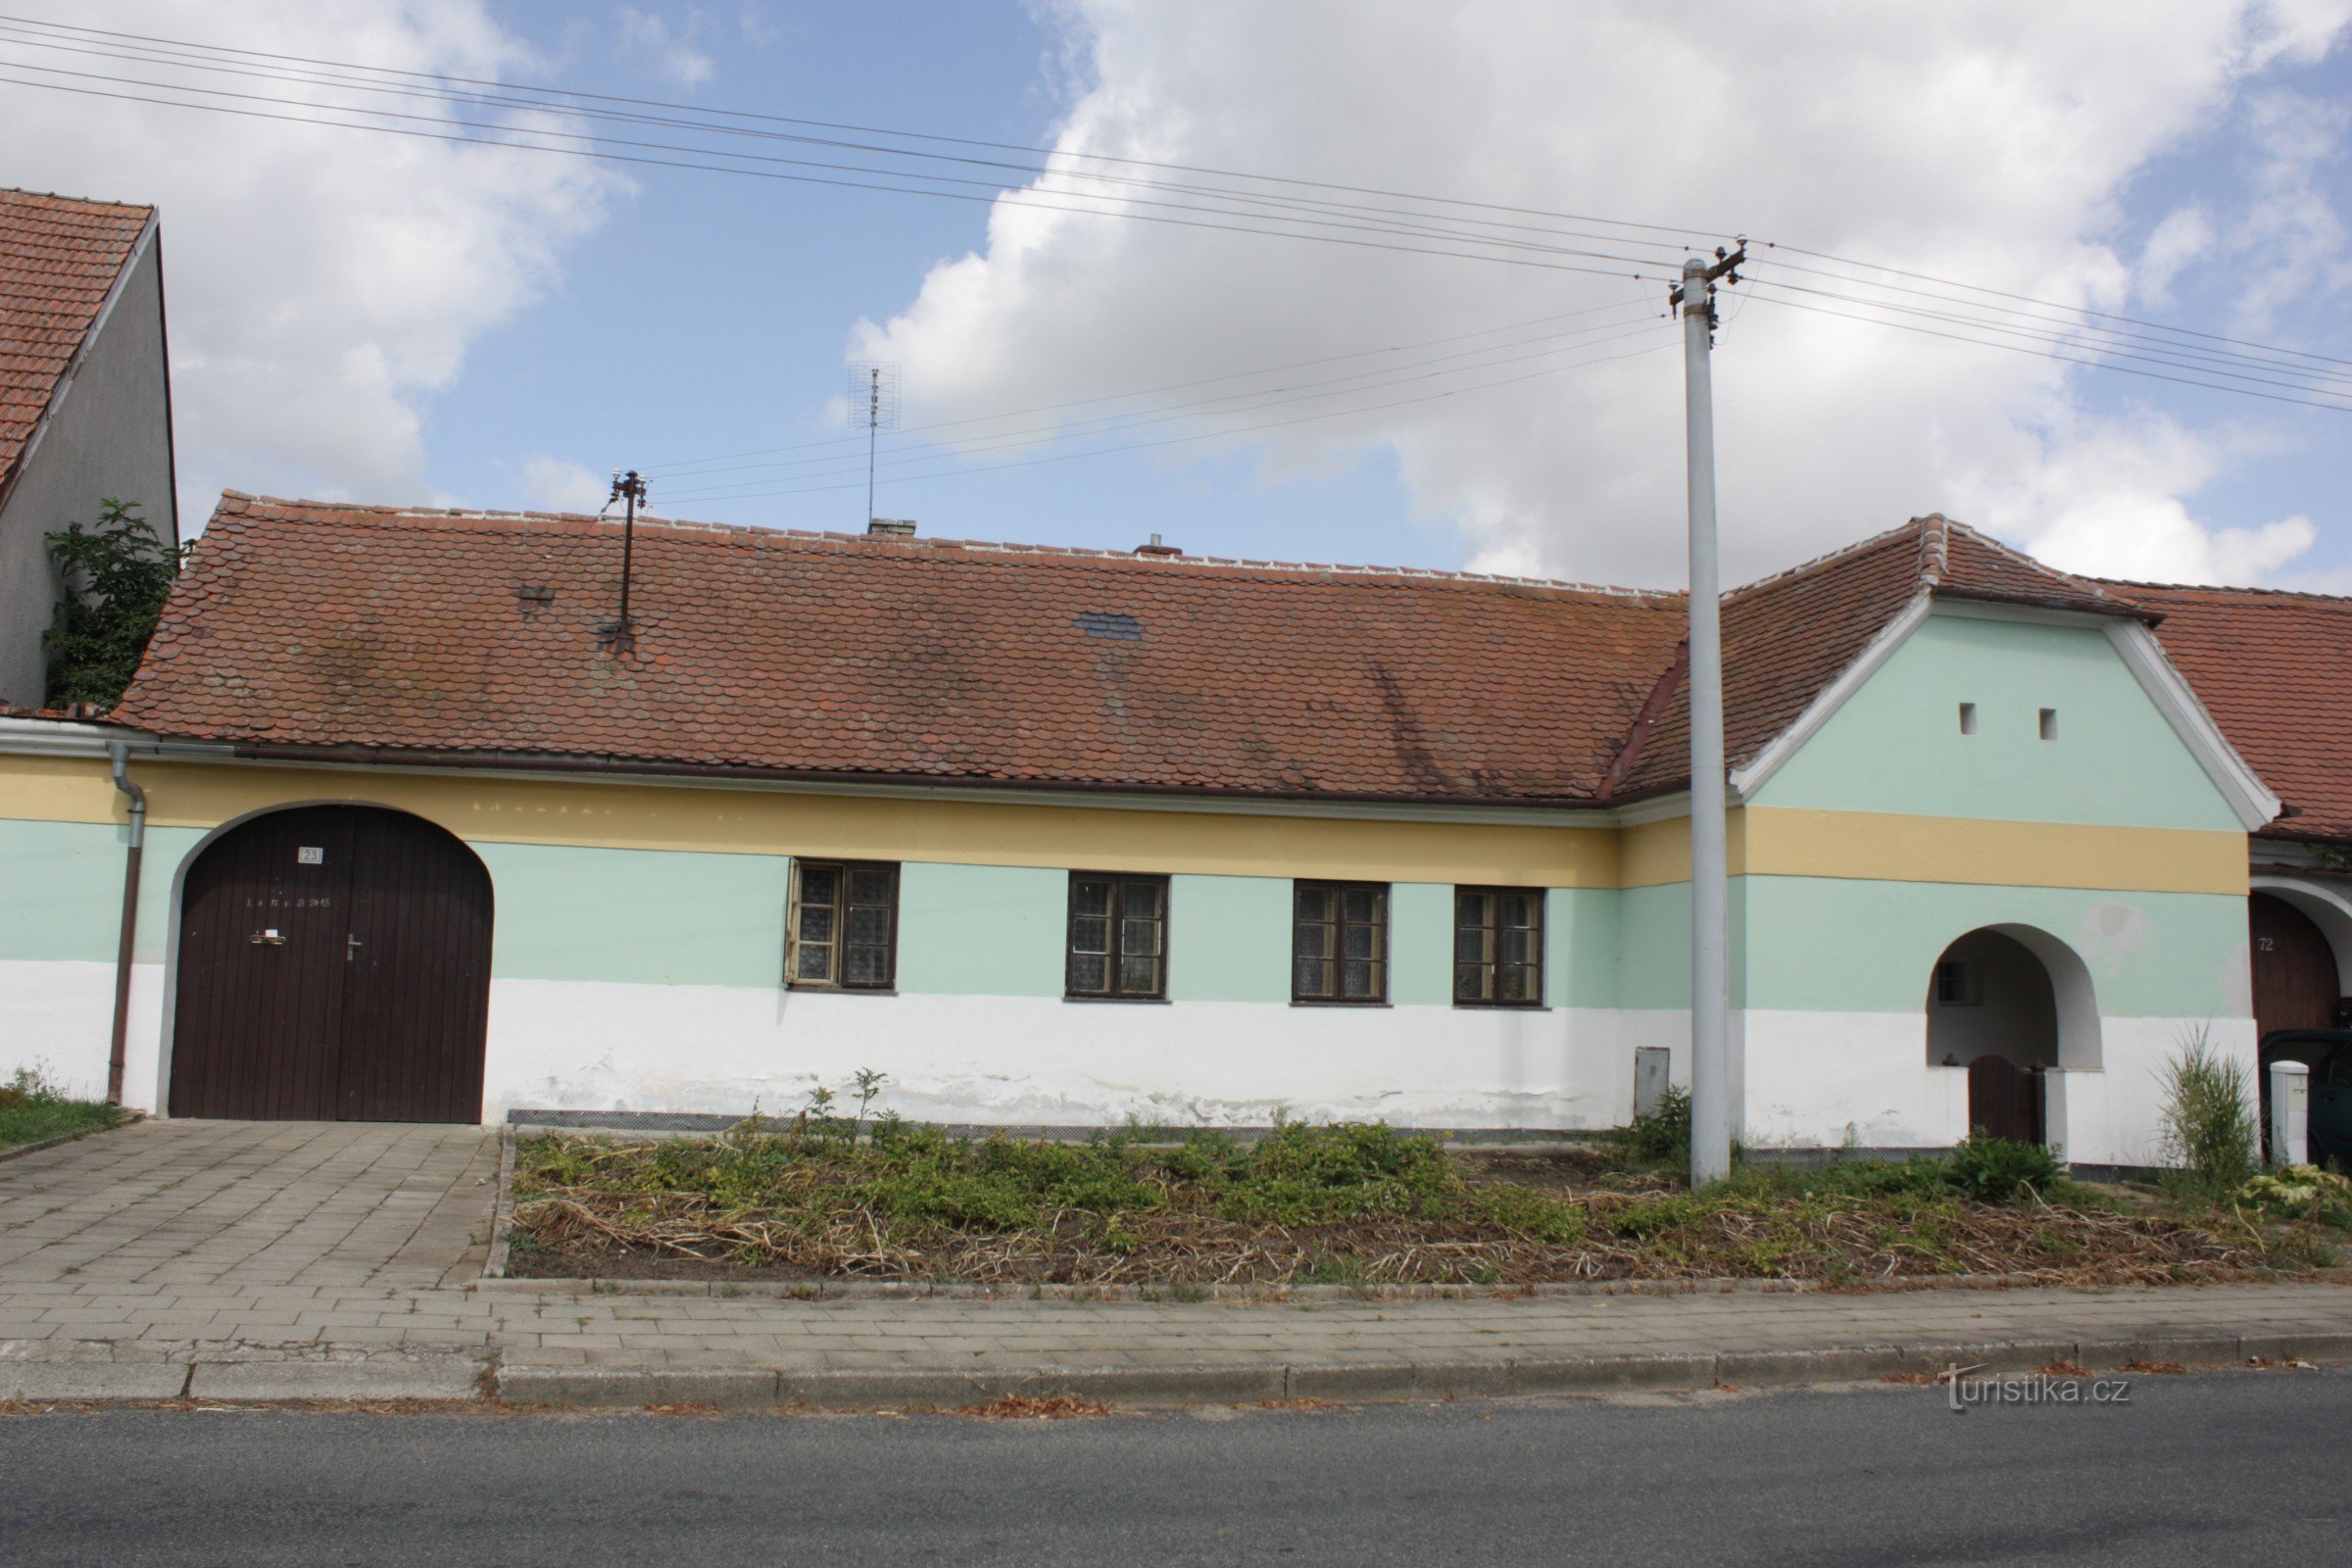 Grindhuis nr. 23 in Lysovice